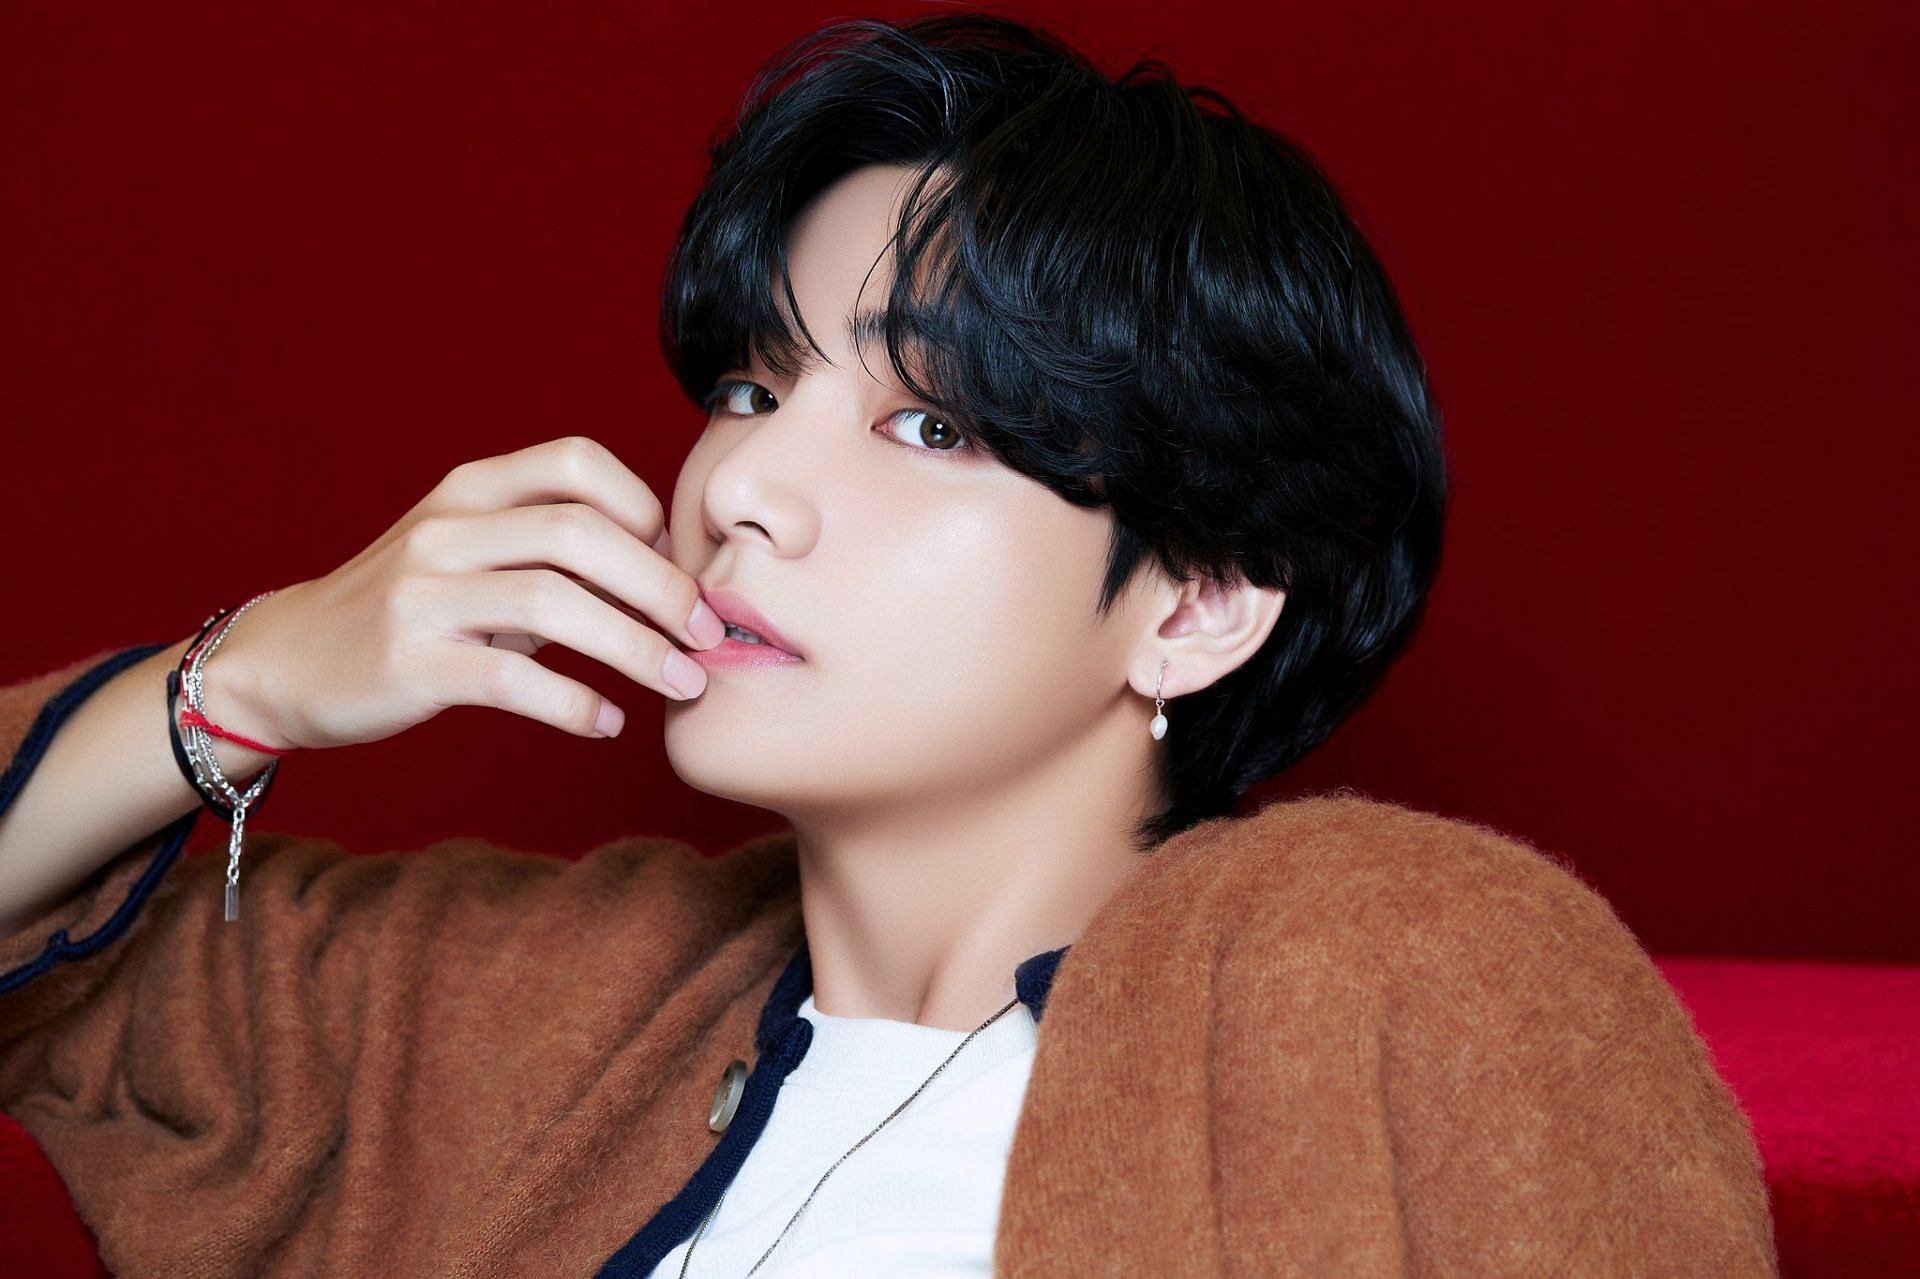 BTS' Taehyung drives his ARMYs crazy with recent photos on Instagram